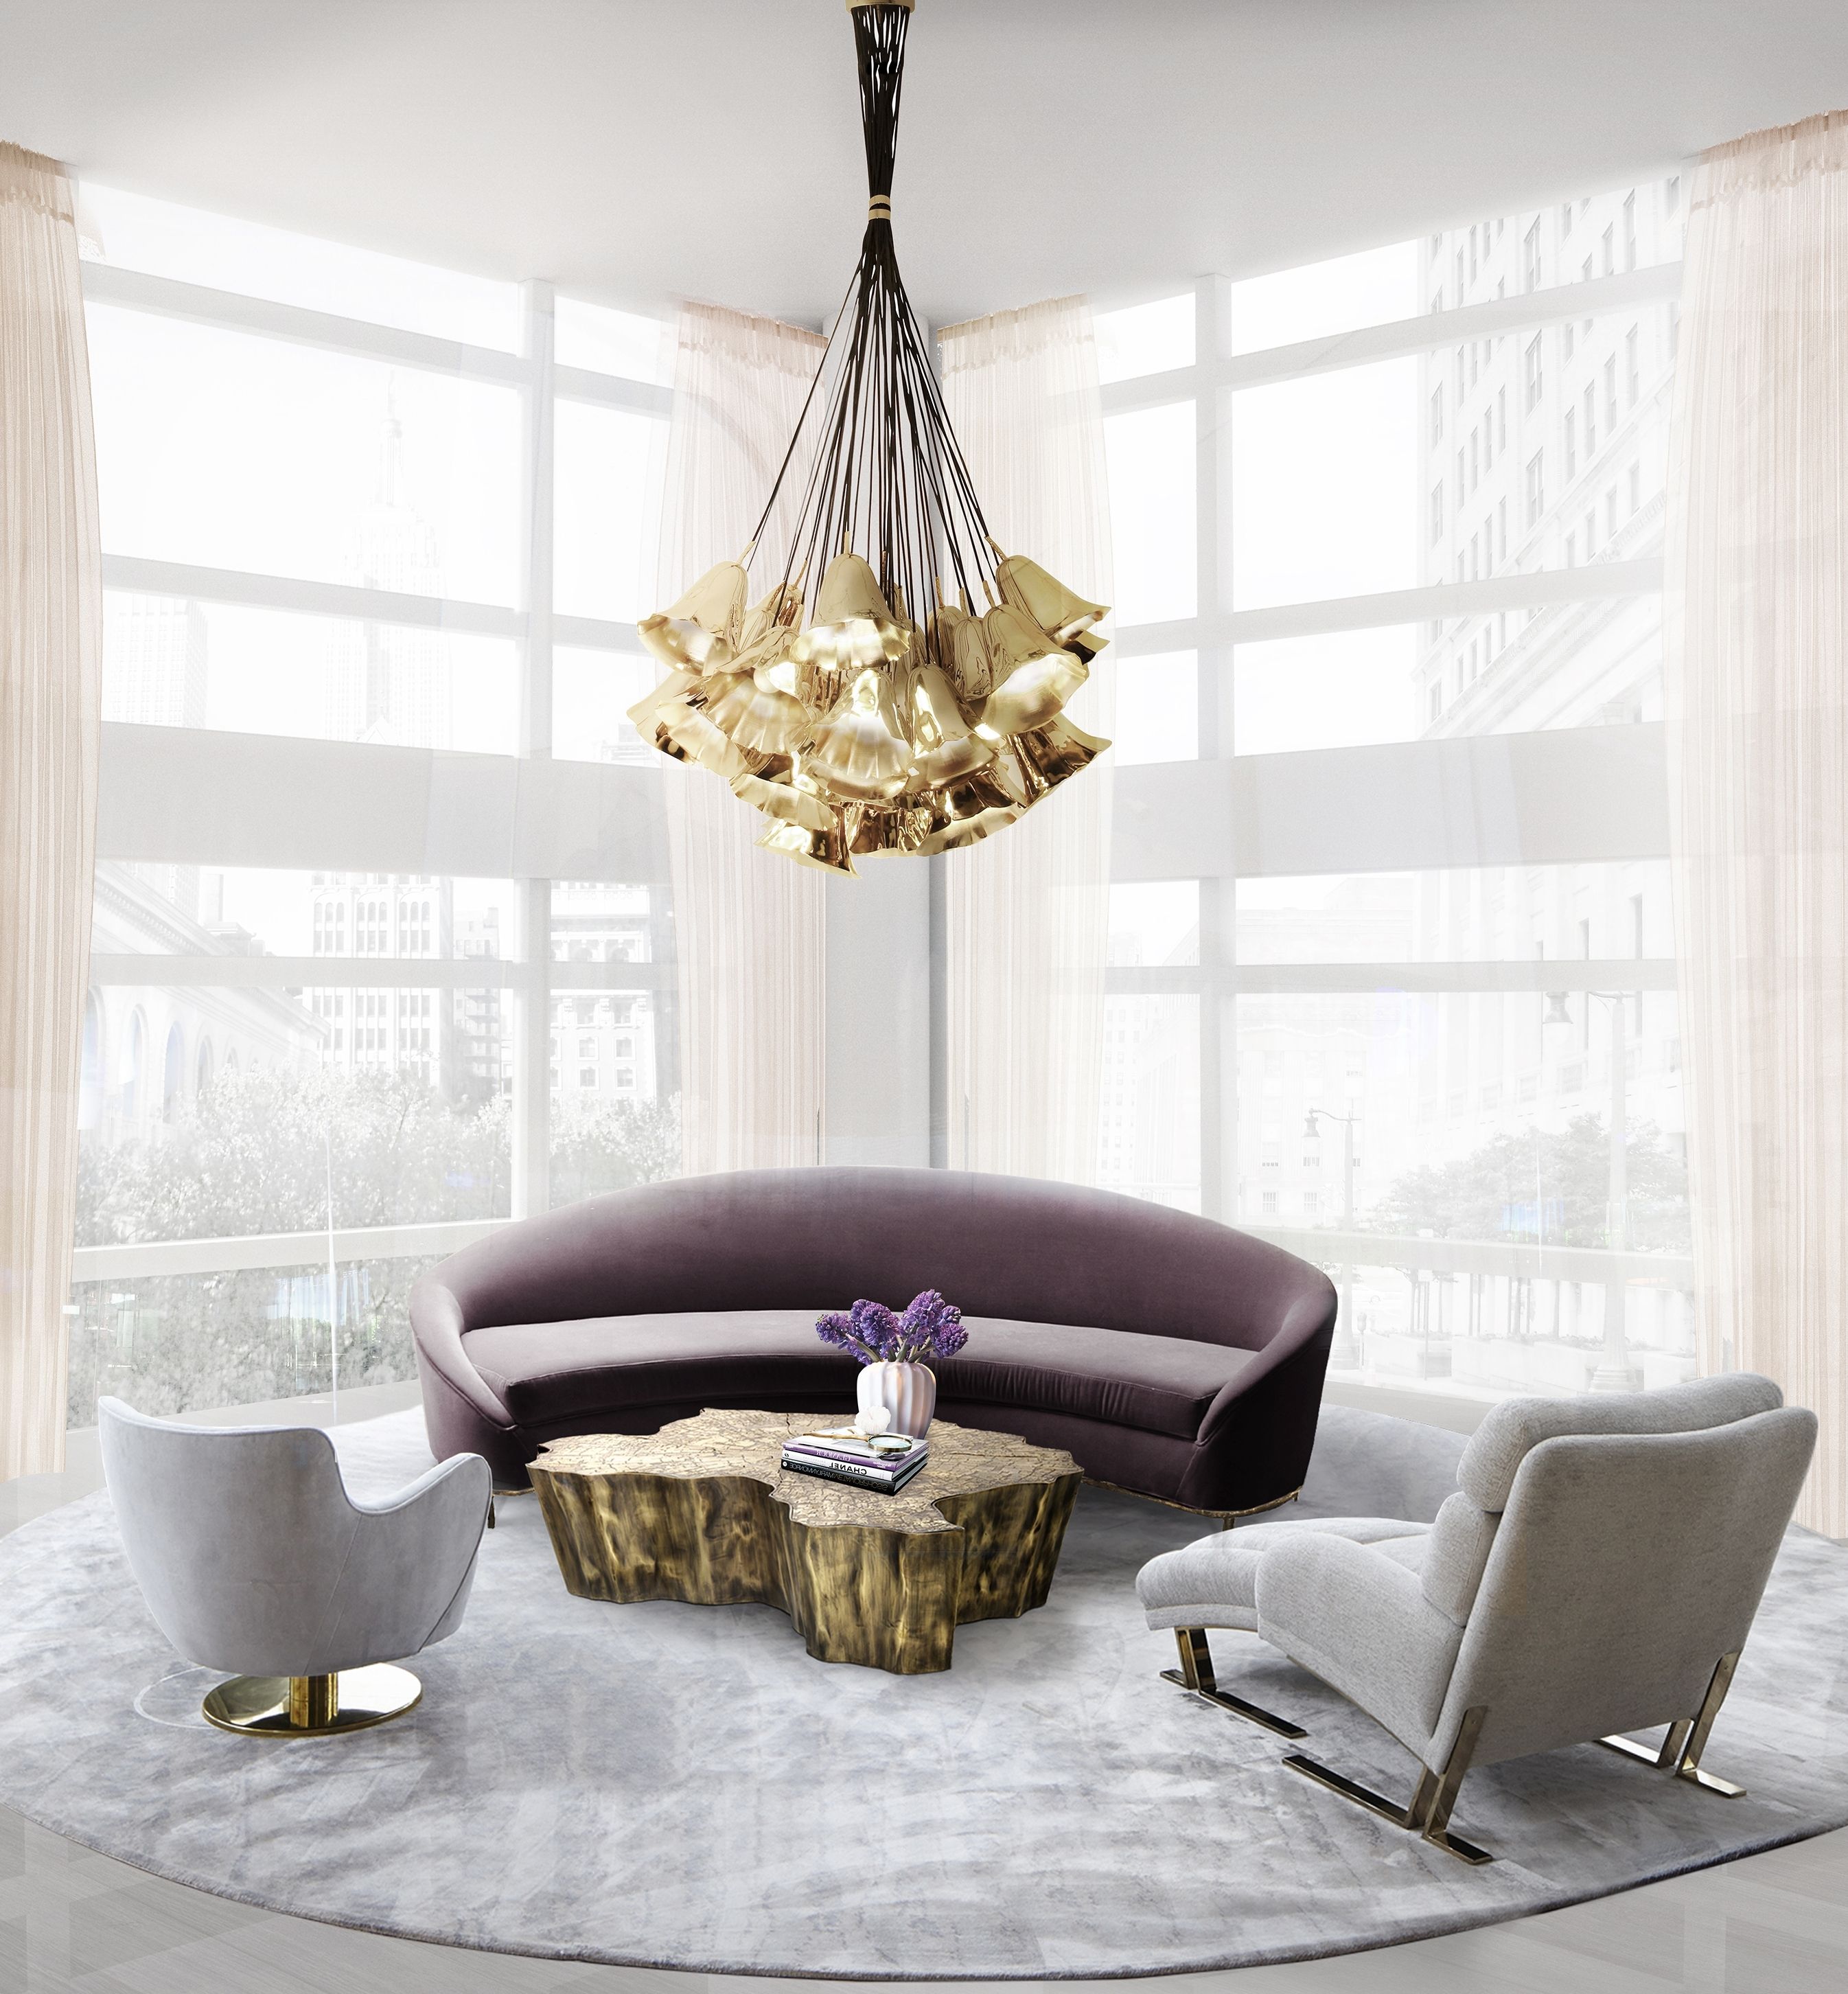 Inspirations & Ideas Within Luxury Sofas (View 15 of 20)